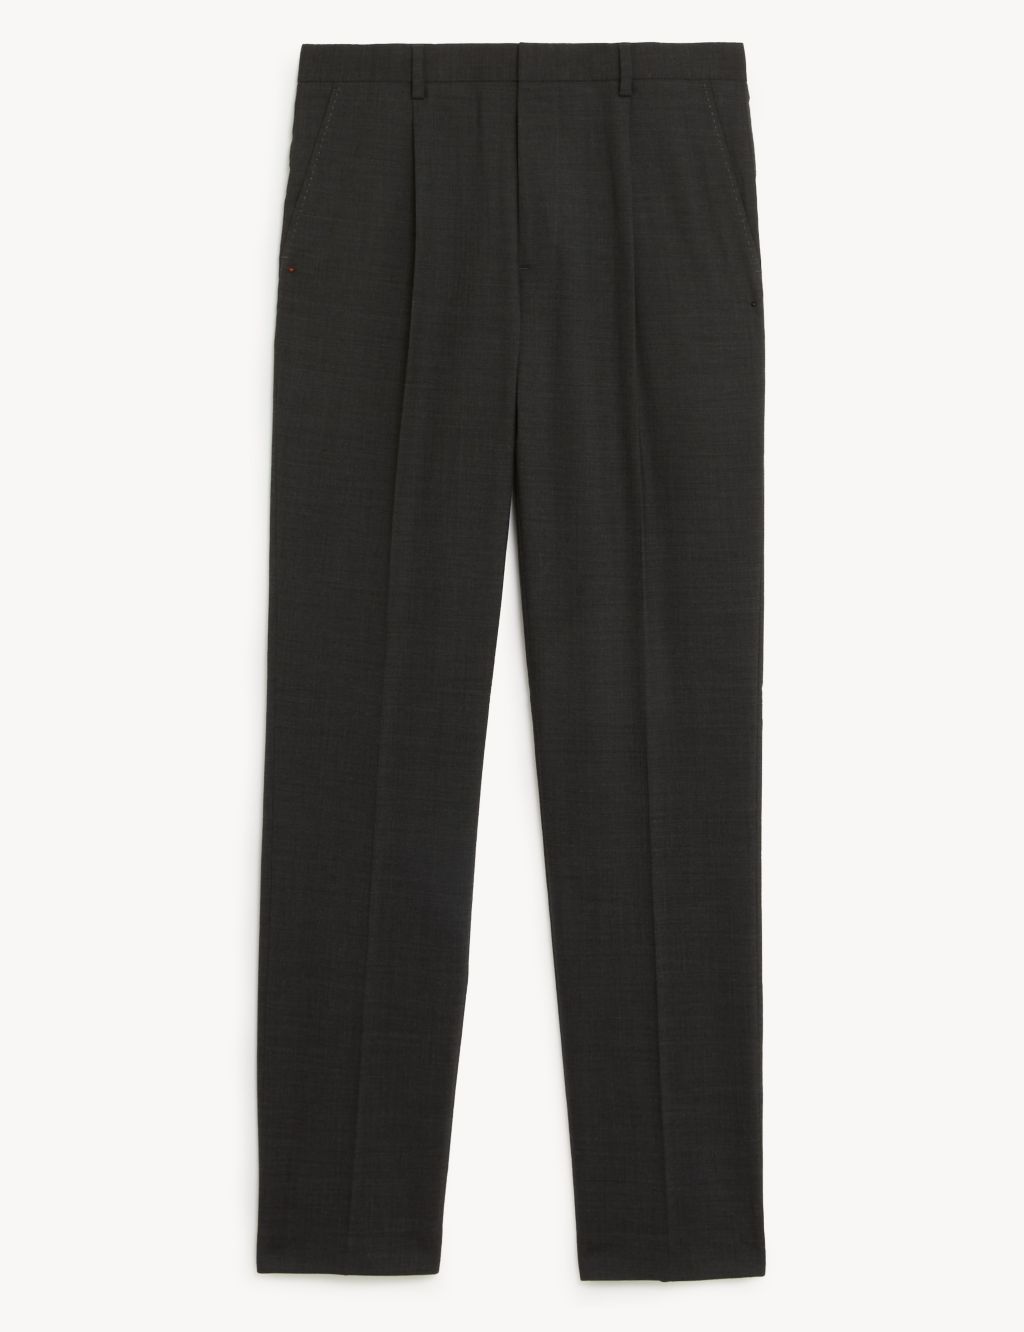 Regular Fit Wool Blend Trousers image 5